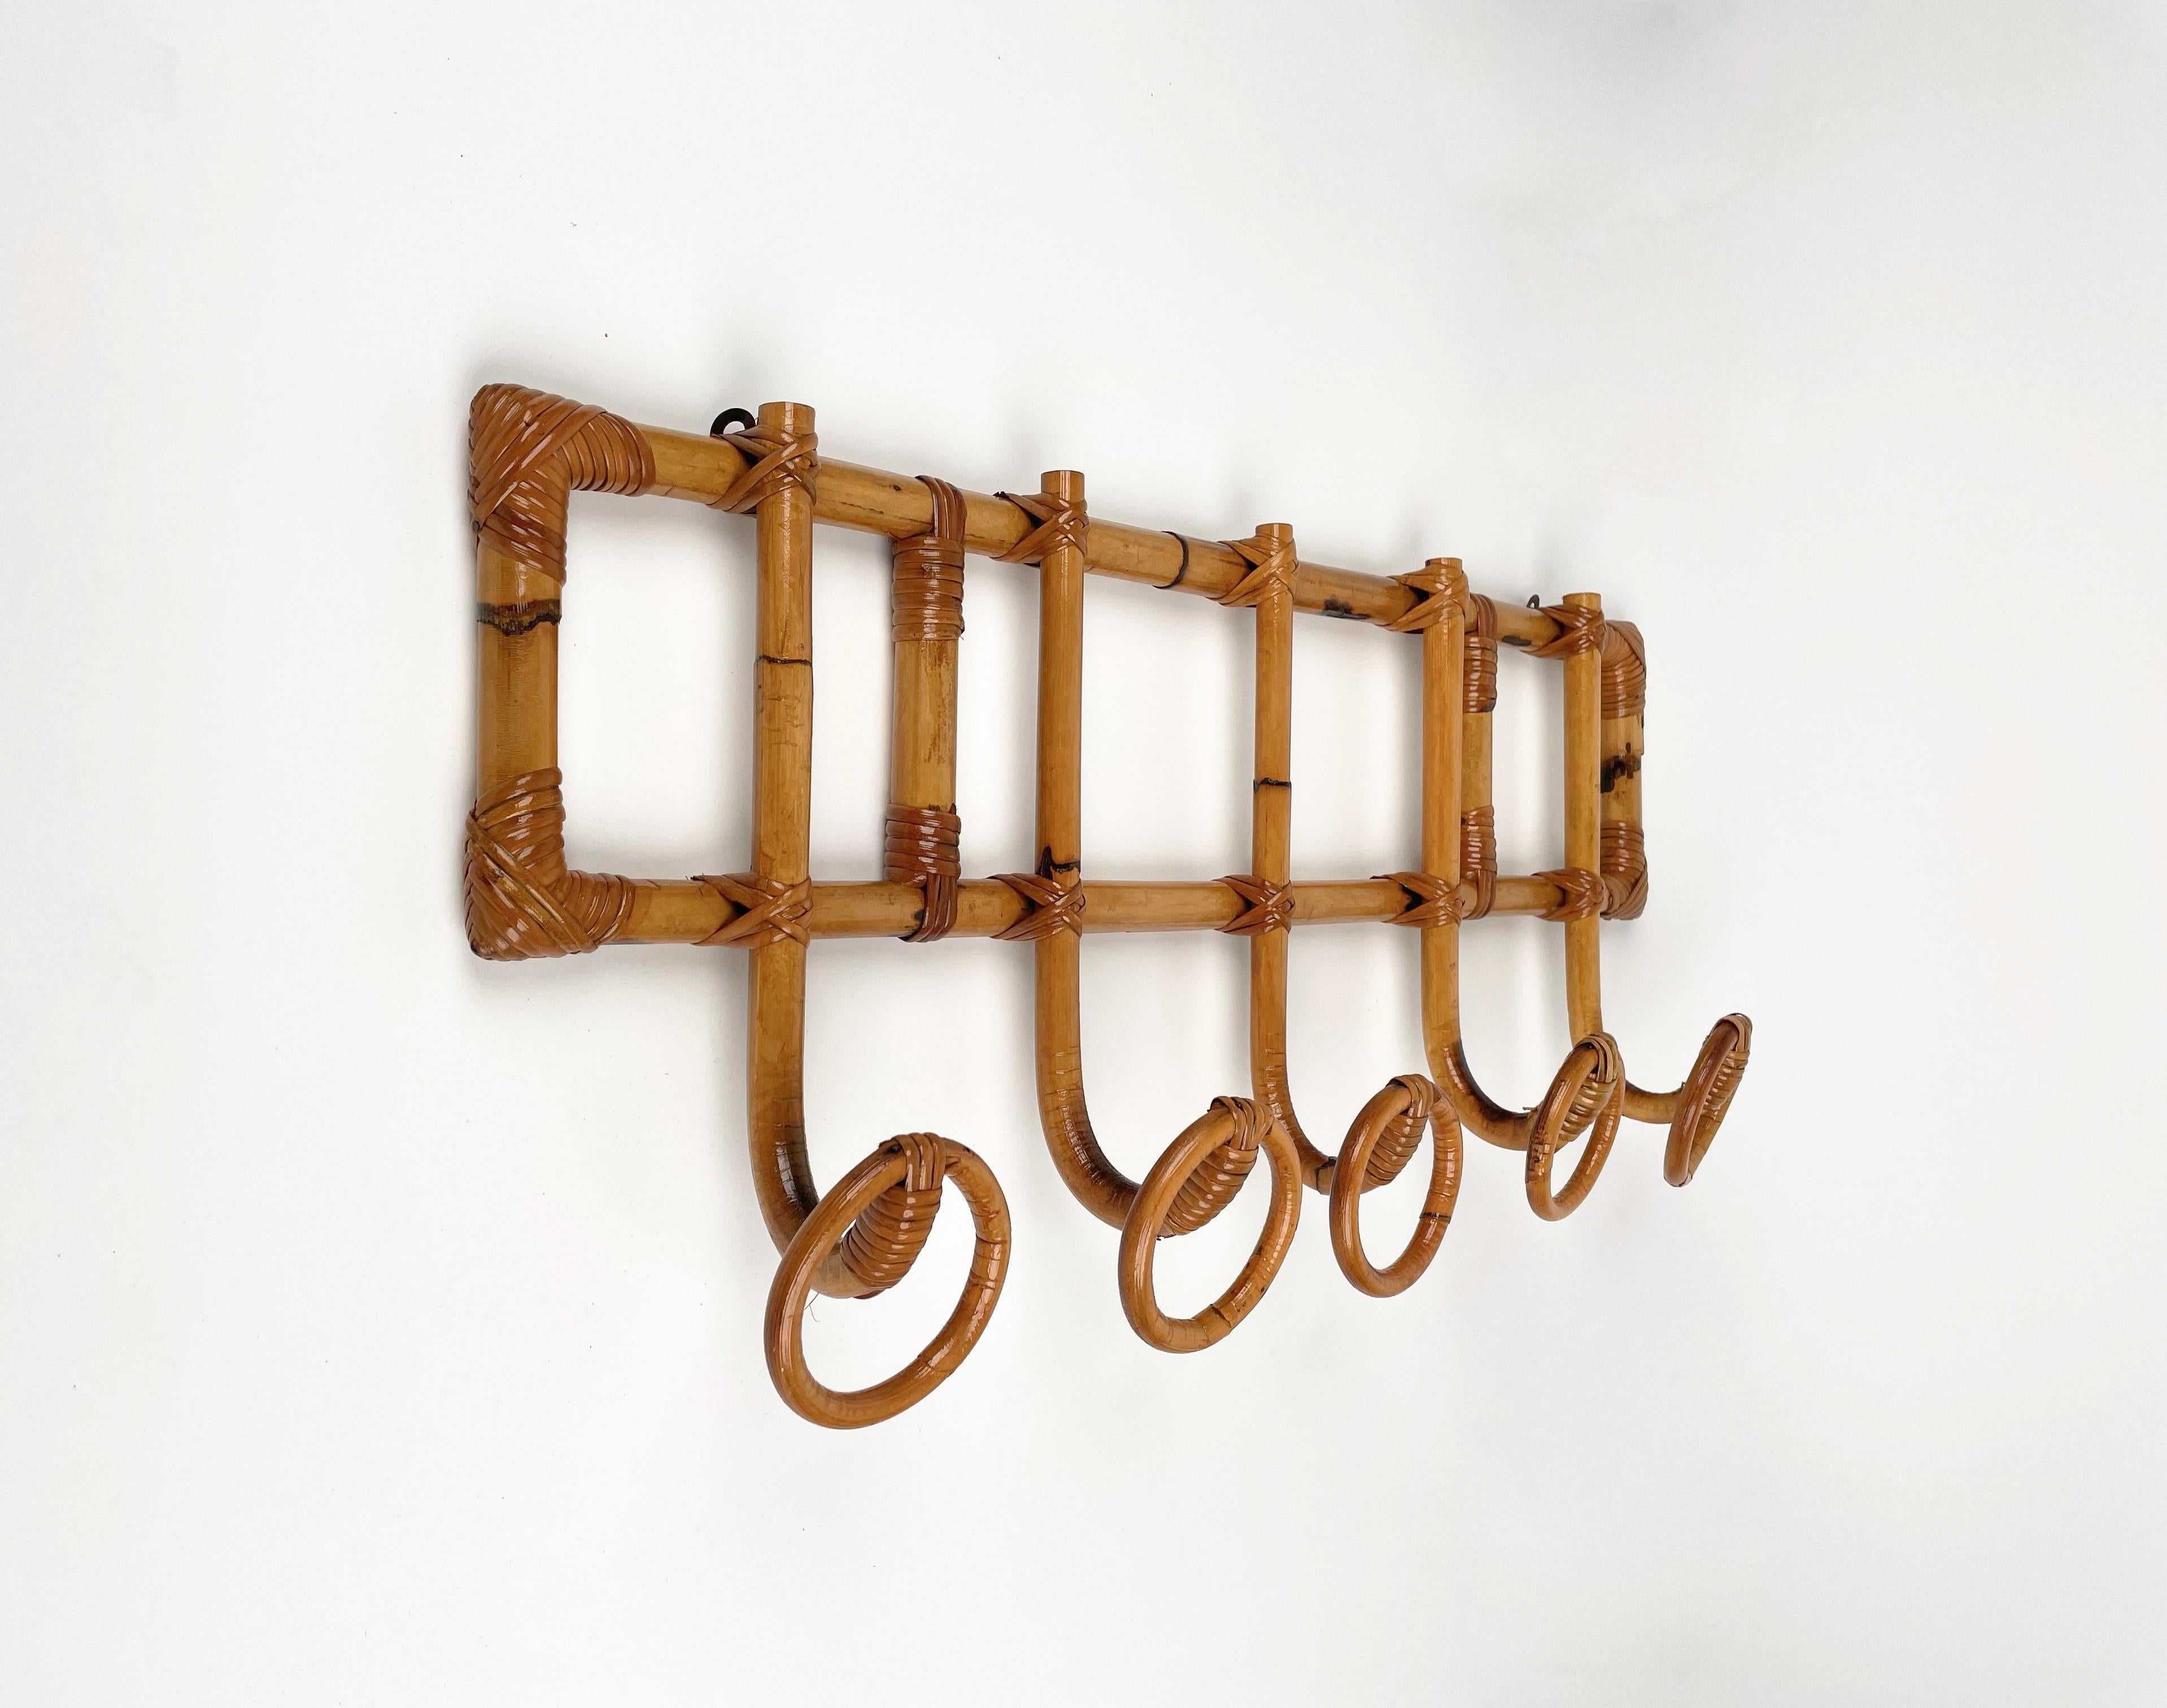 Rectangular coat hanger rack in bamboo and rattan featuring five circular hooks.

Made in Italy in the 1960s.